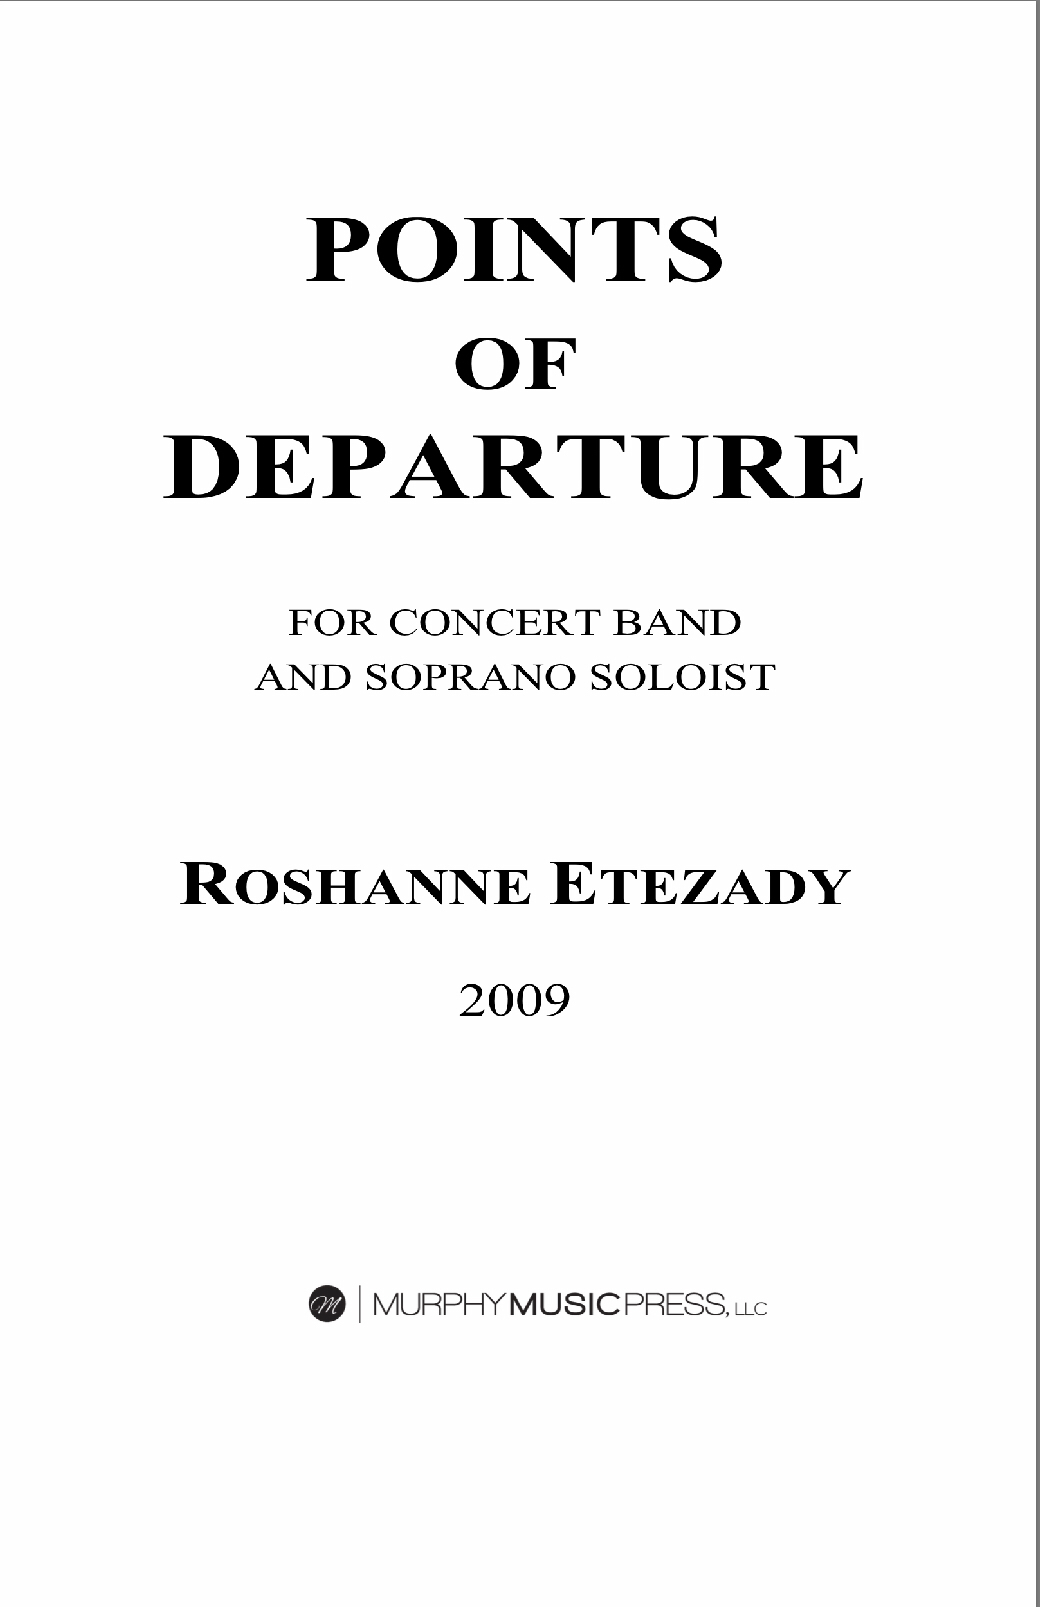 Points Of Departure (Score Only) by Roshanne Etezady